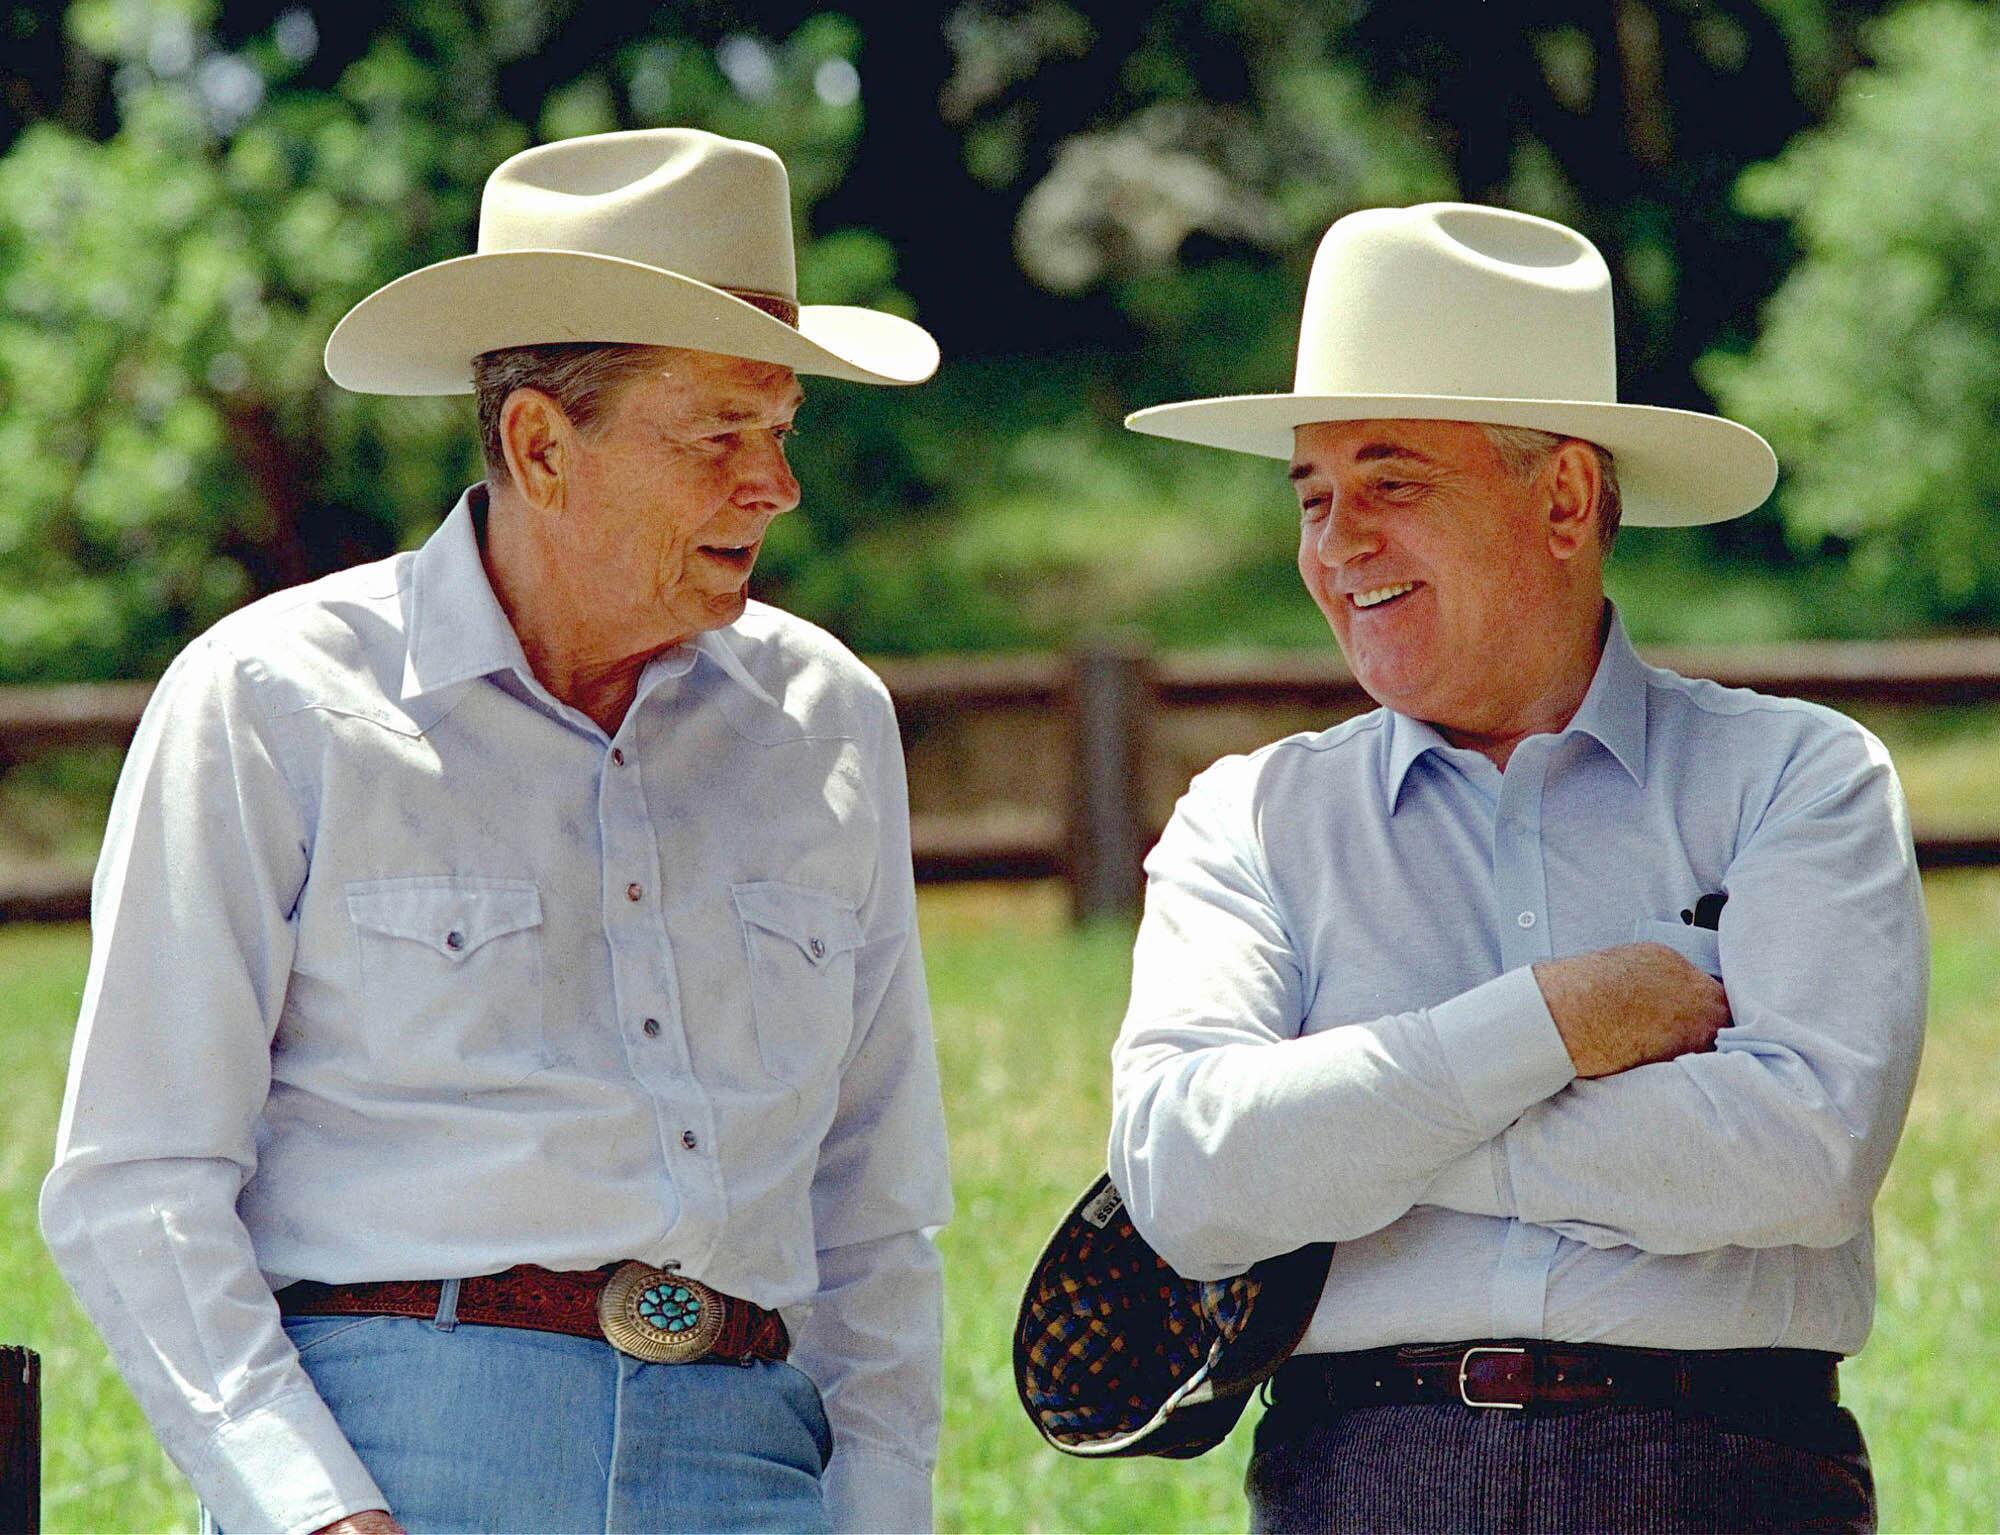 Two men in cowboy hats, one with his arms crossed and smiling on the right, share a conversation